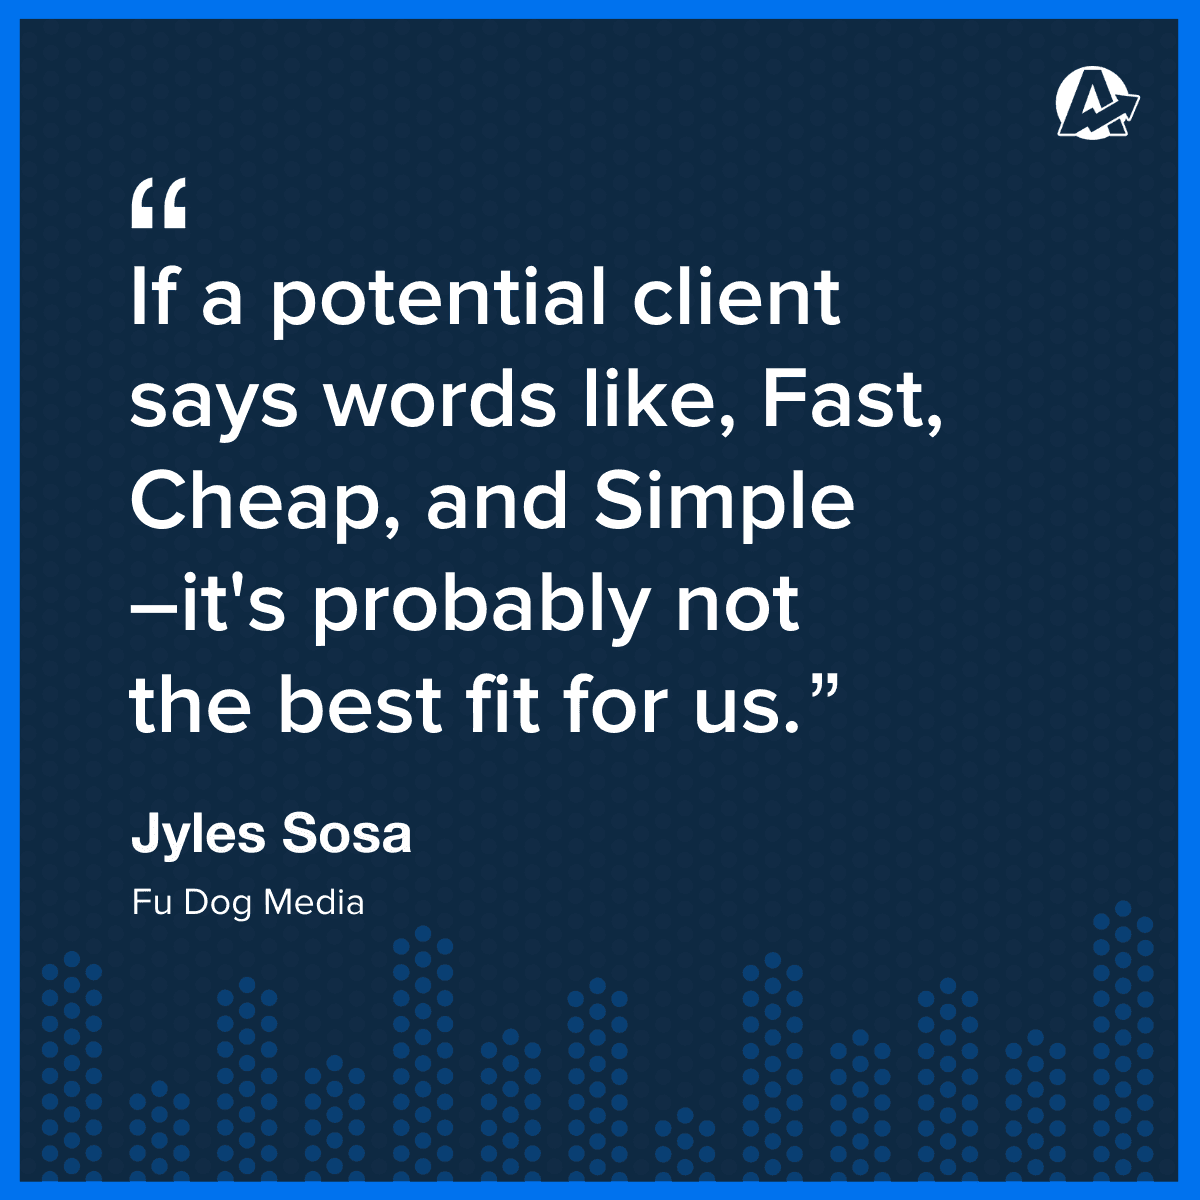 Fast, Cheap, and Simple Quote from Jyles Sosa, Fu Dog Media